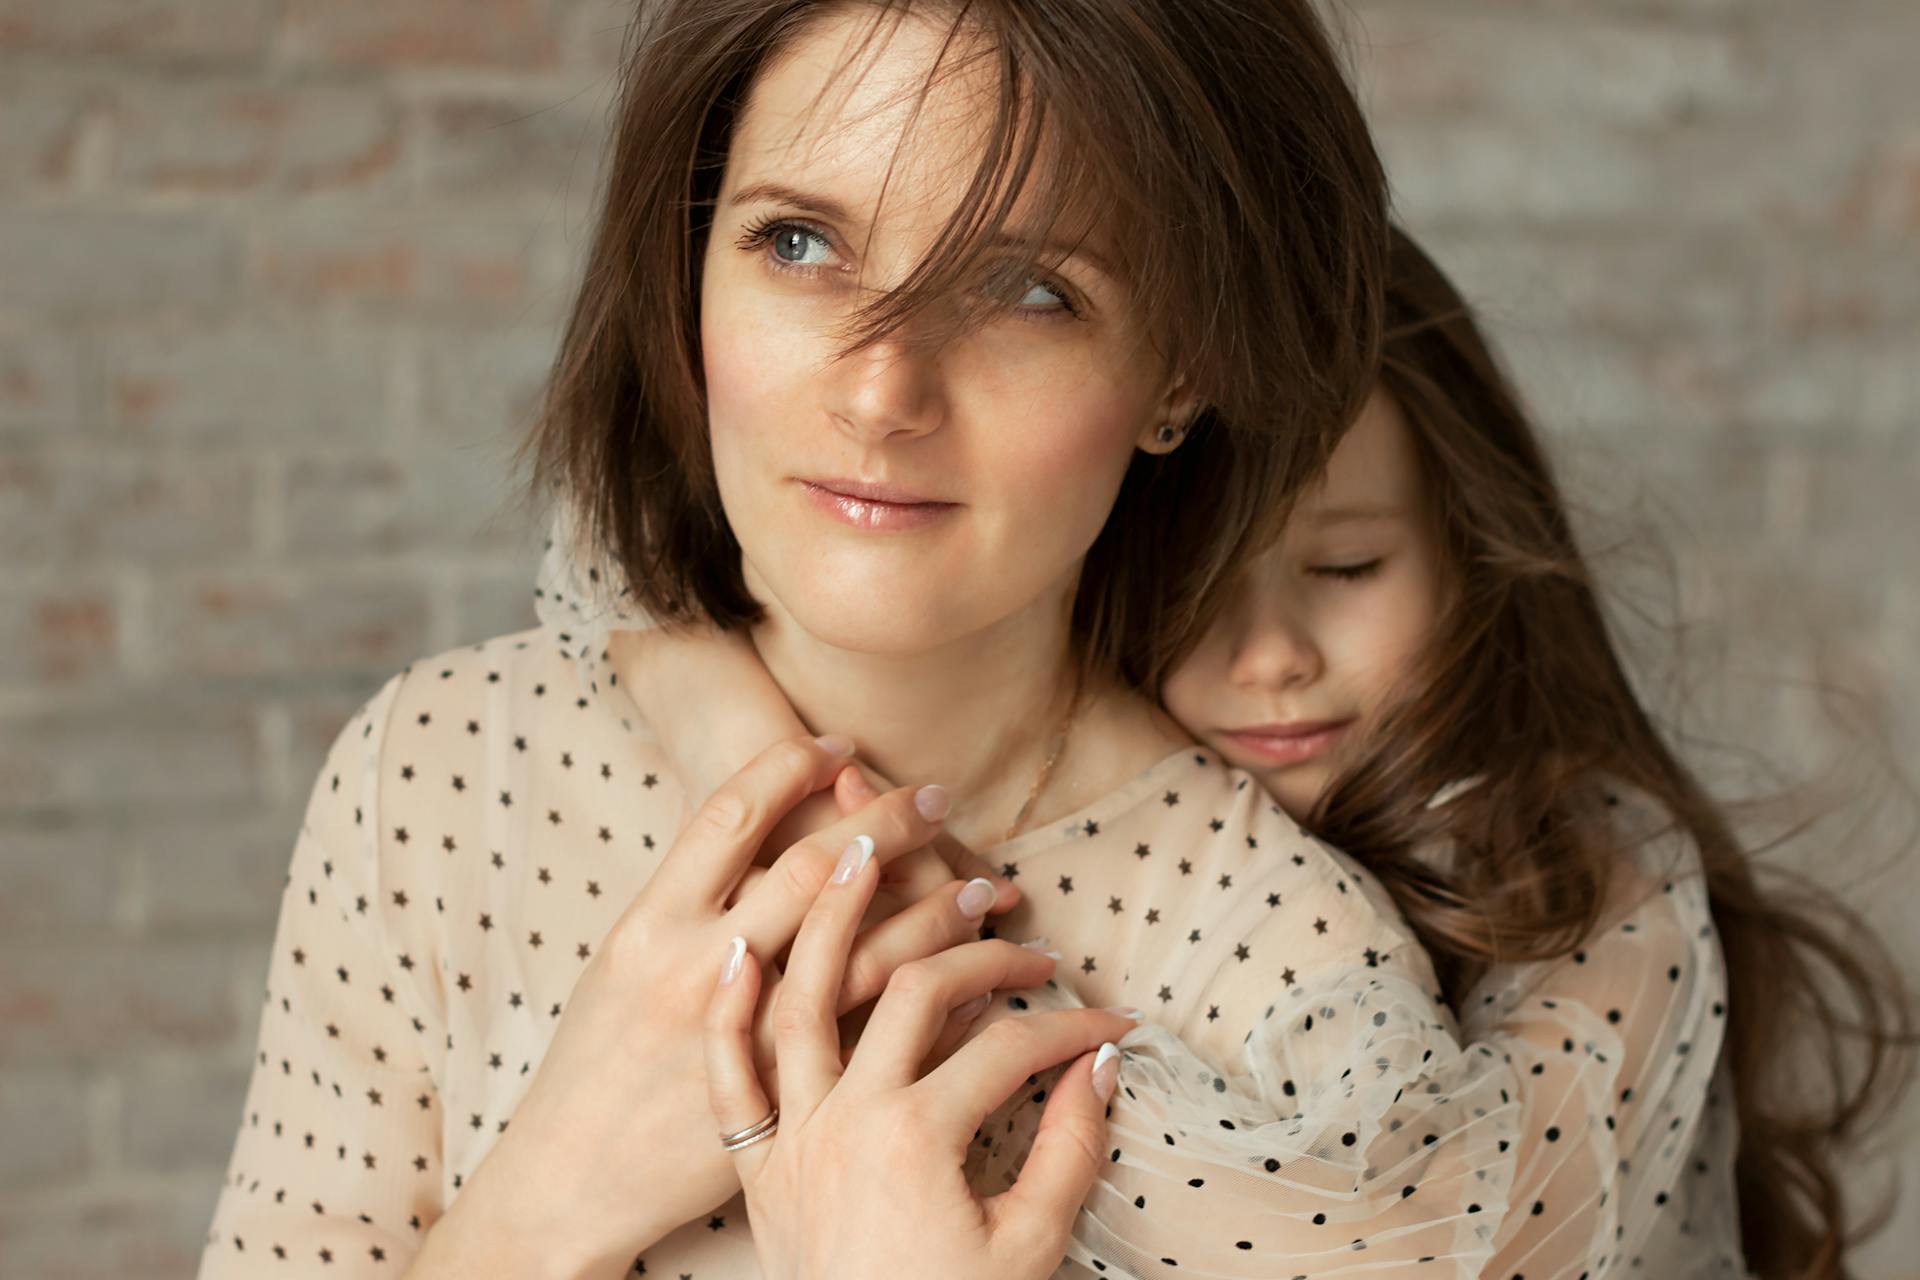 A mother with her little daughter | Source: Pexels